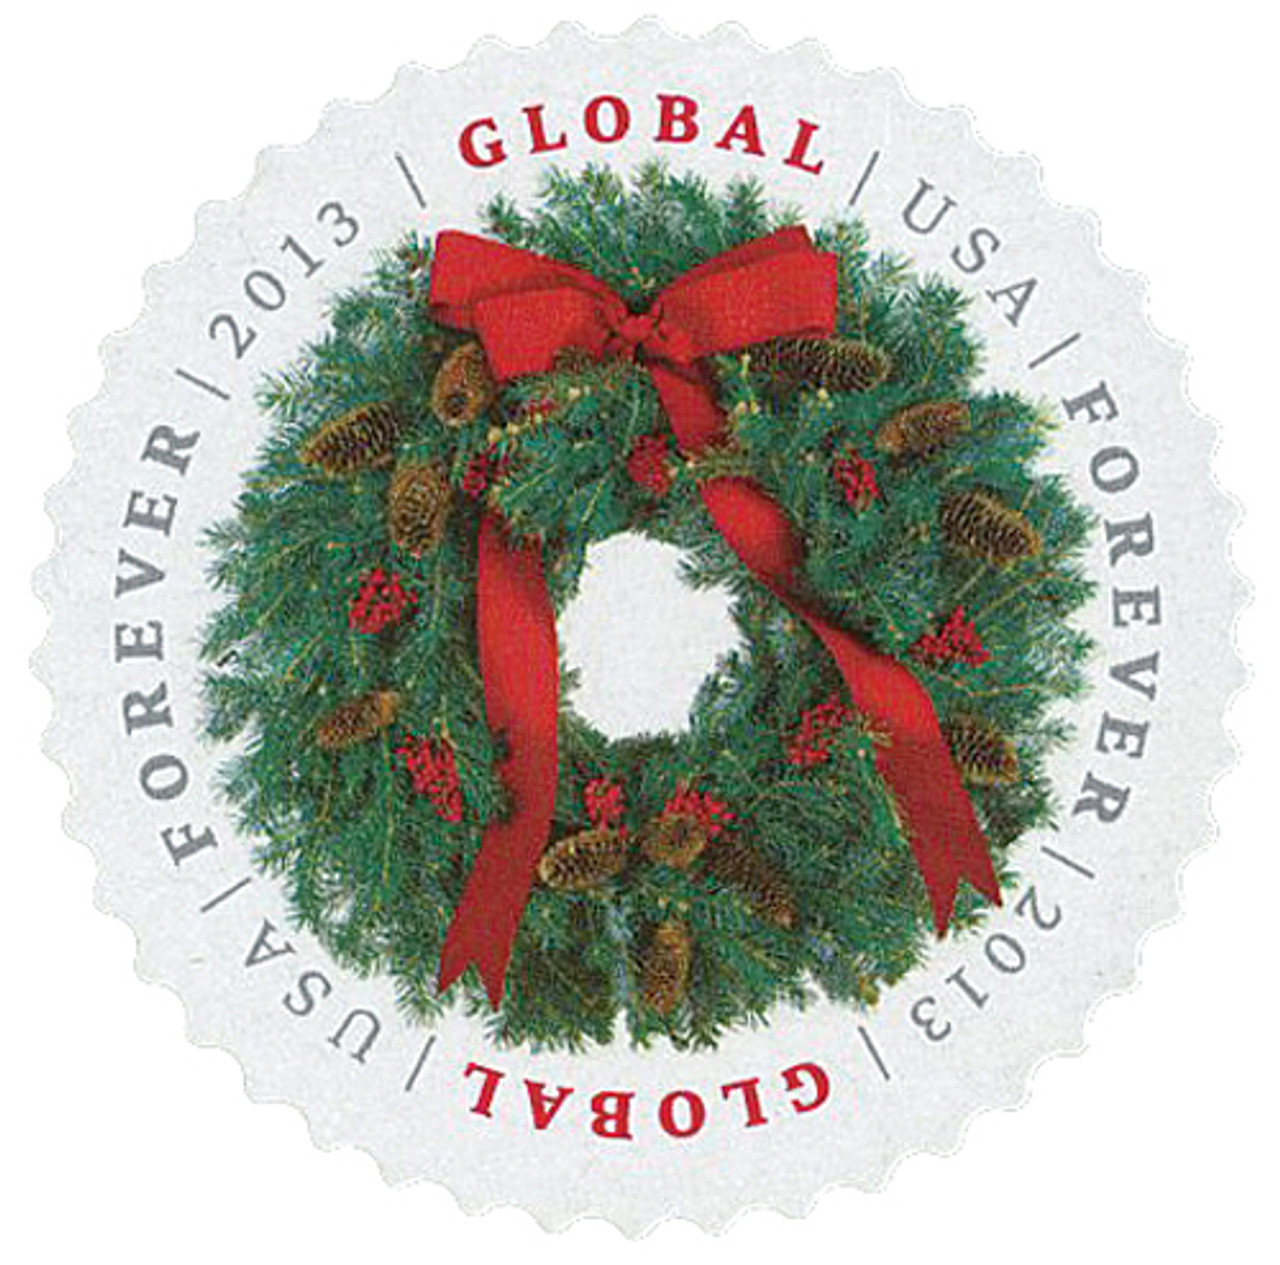 4814 - 2013 Global Forever Stamp - Evergreen Wreath - Mystic Stamp Company